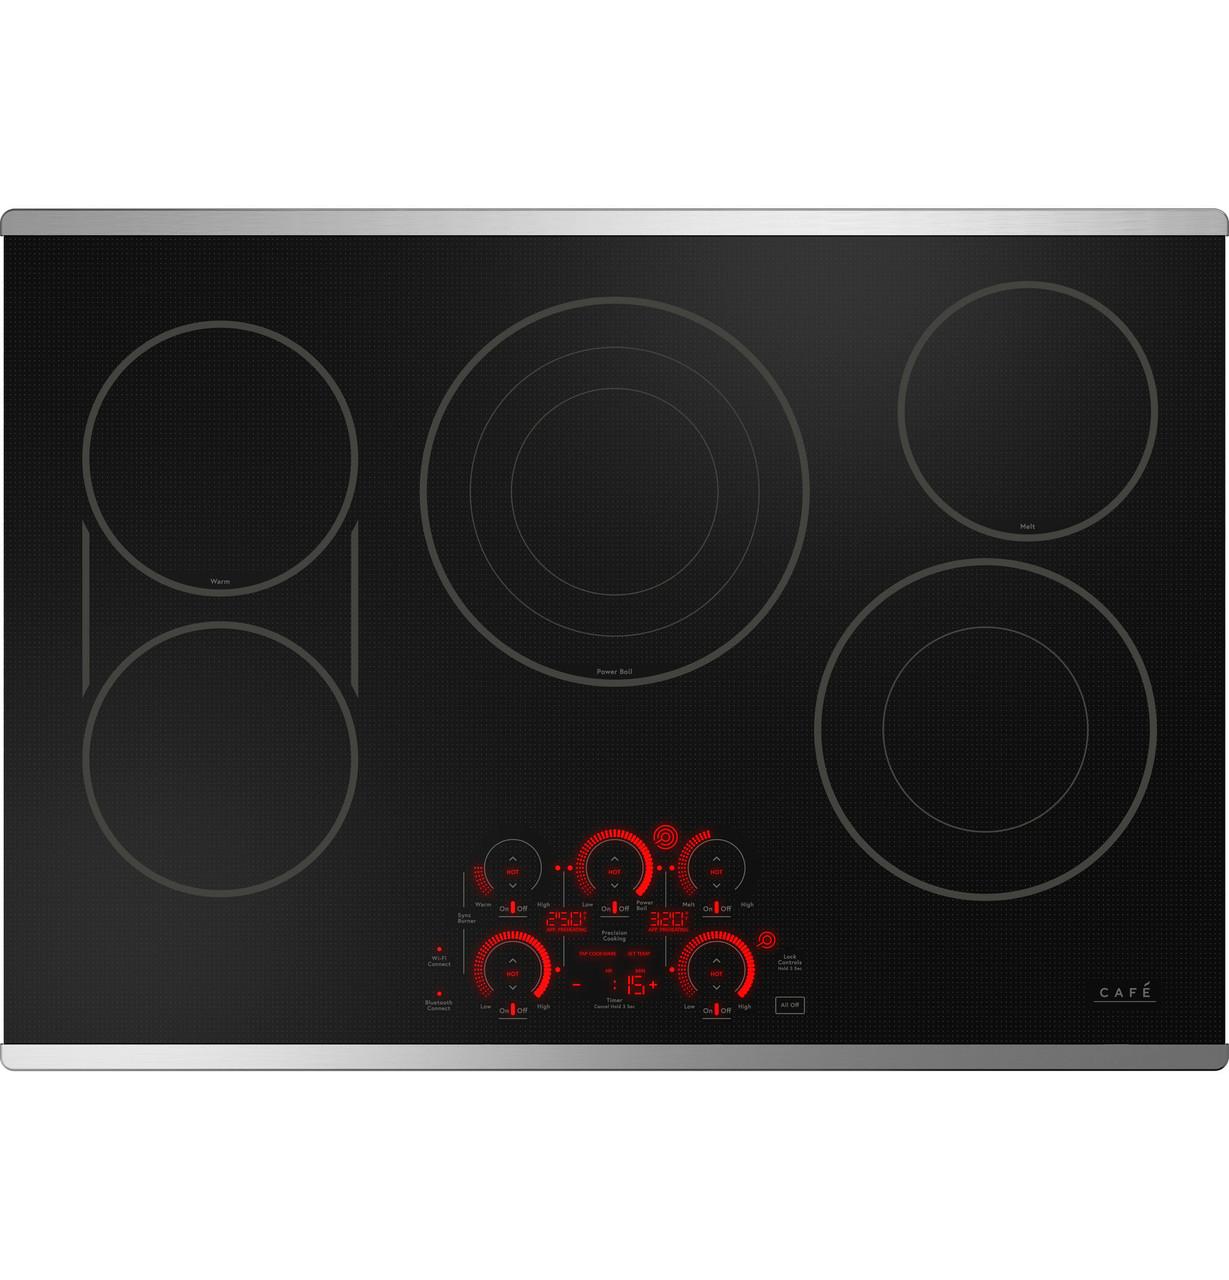 Cafe Caf(eback)™ 30" Touch-Control Electric Cooktop